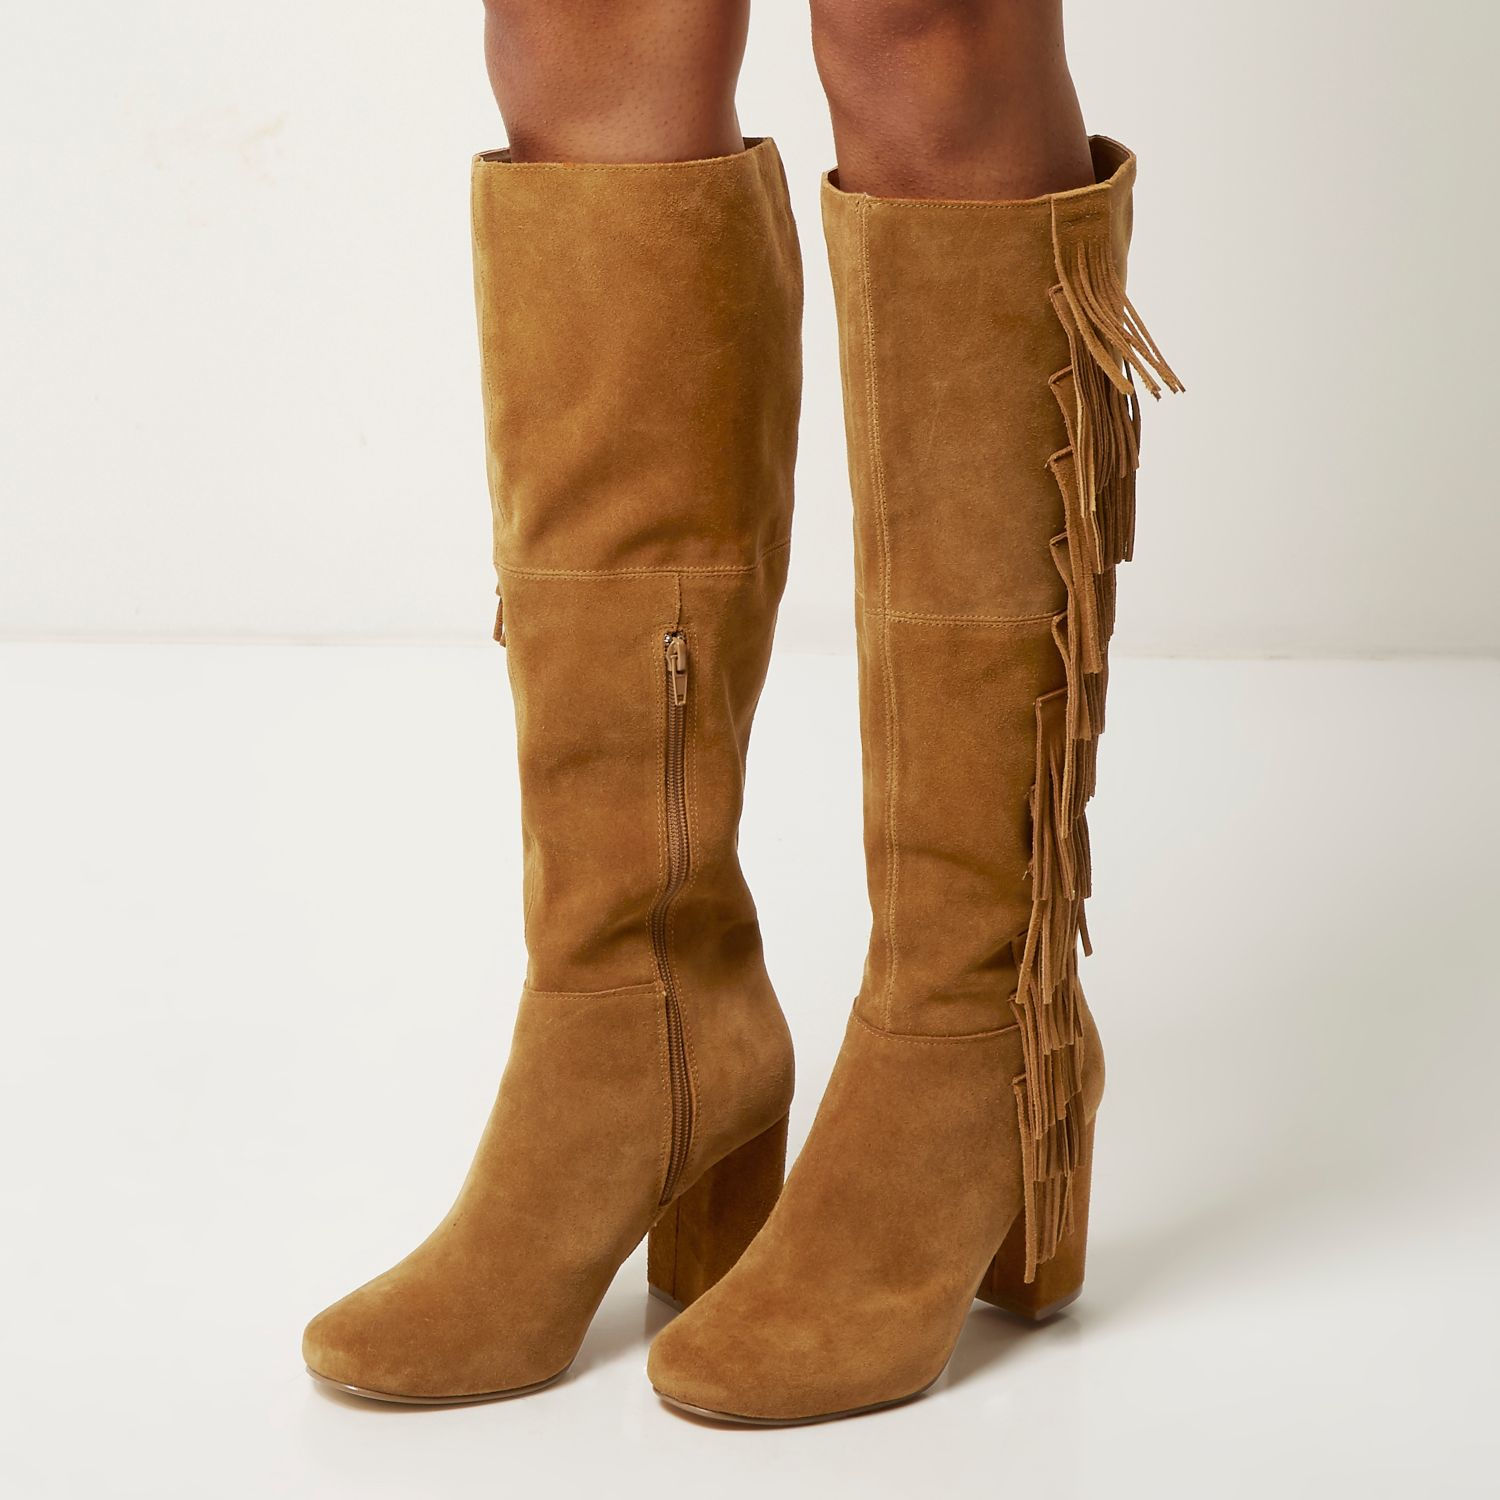 River Island Tan Suede Fringed Knee High Heeled Boots in Blue - Lyst